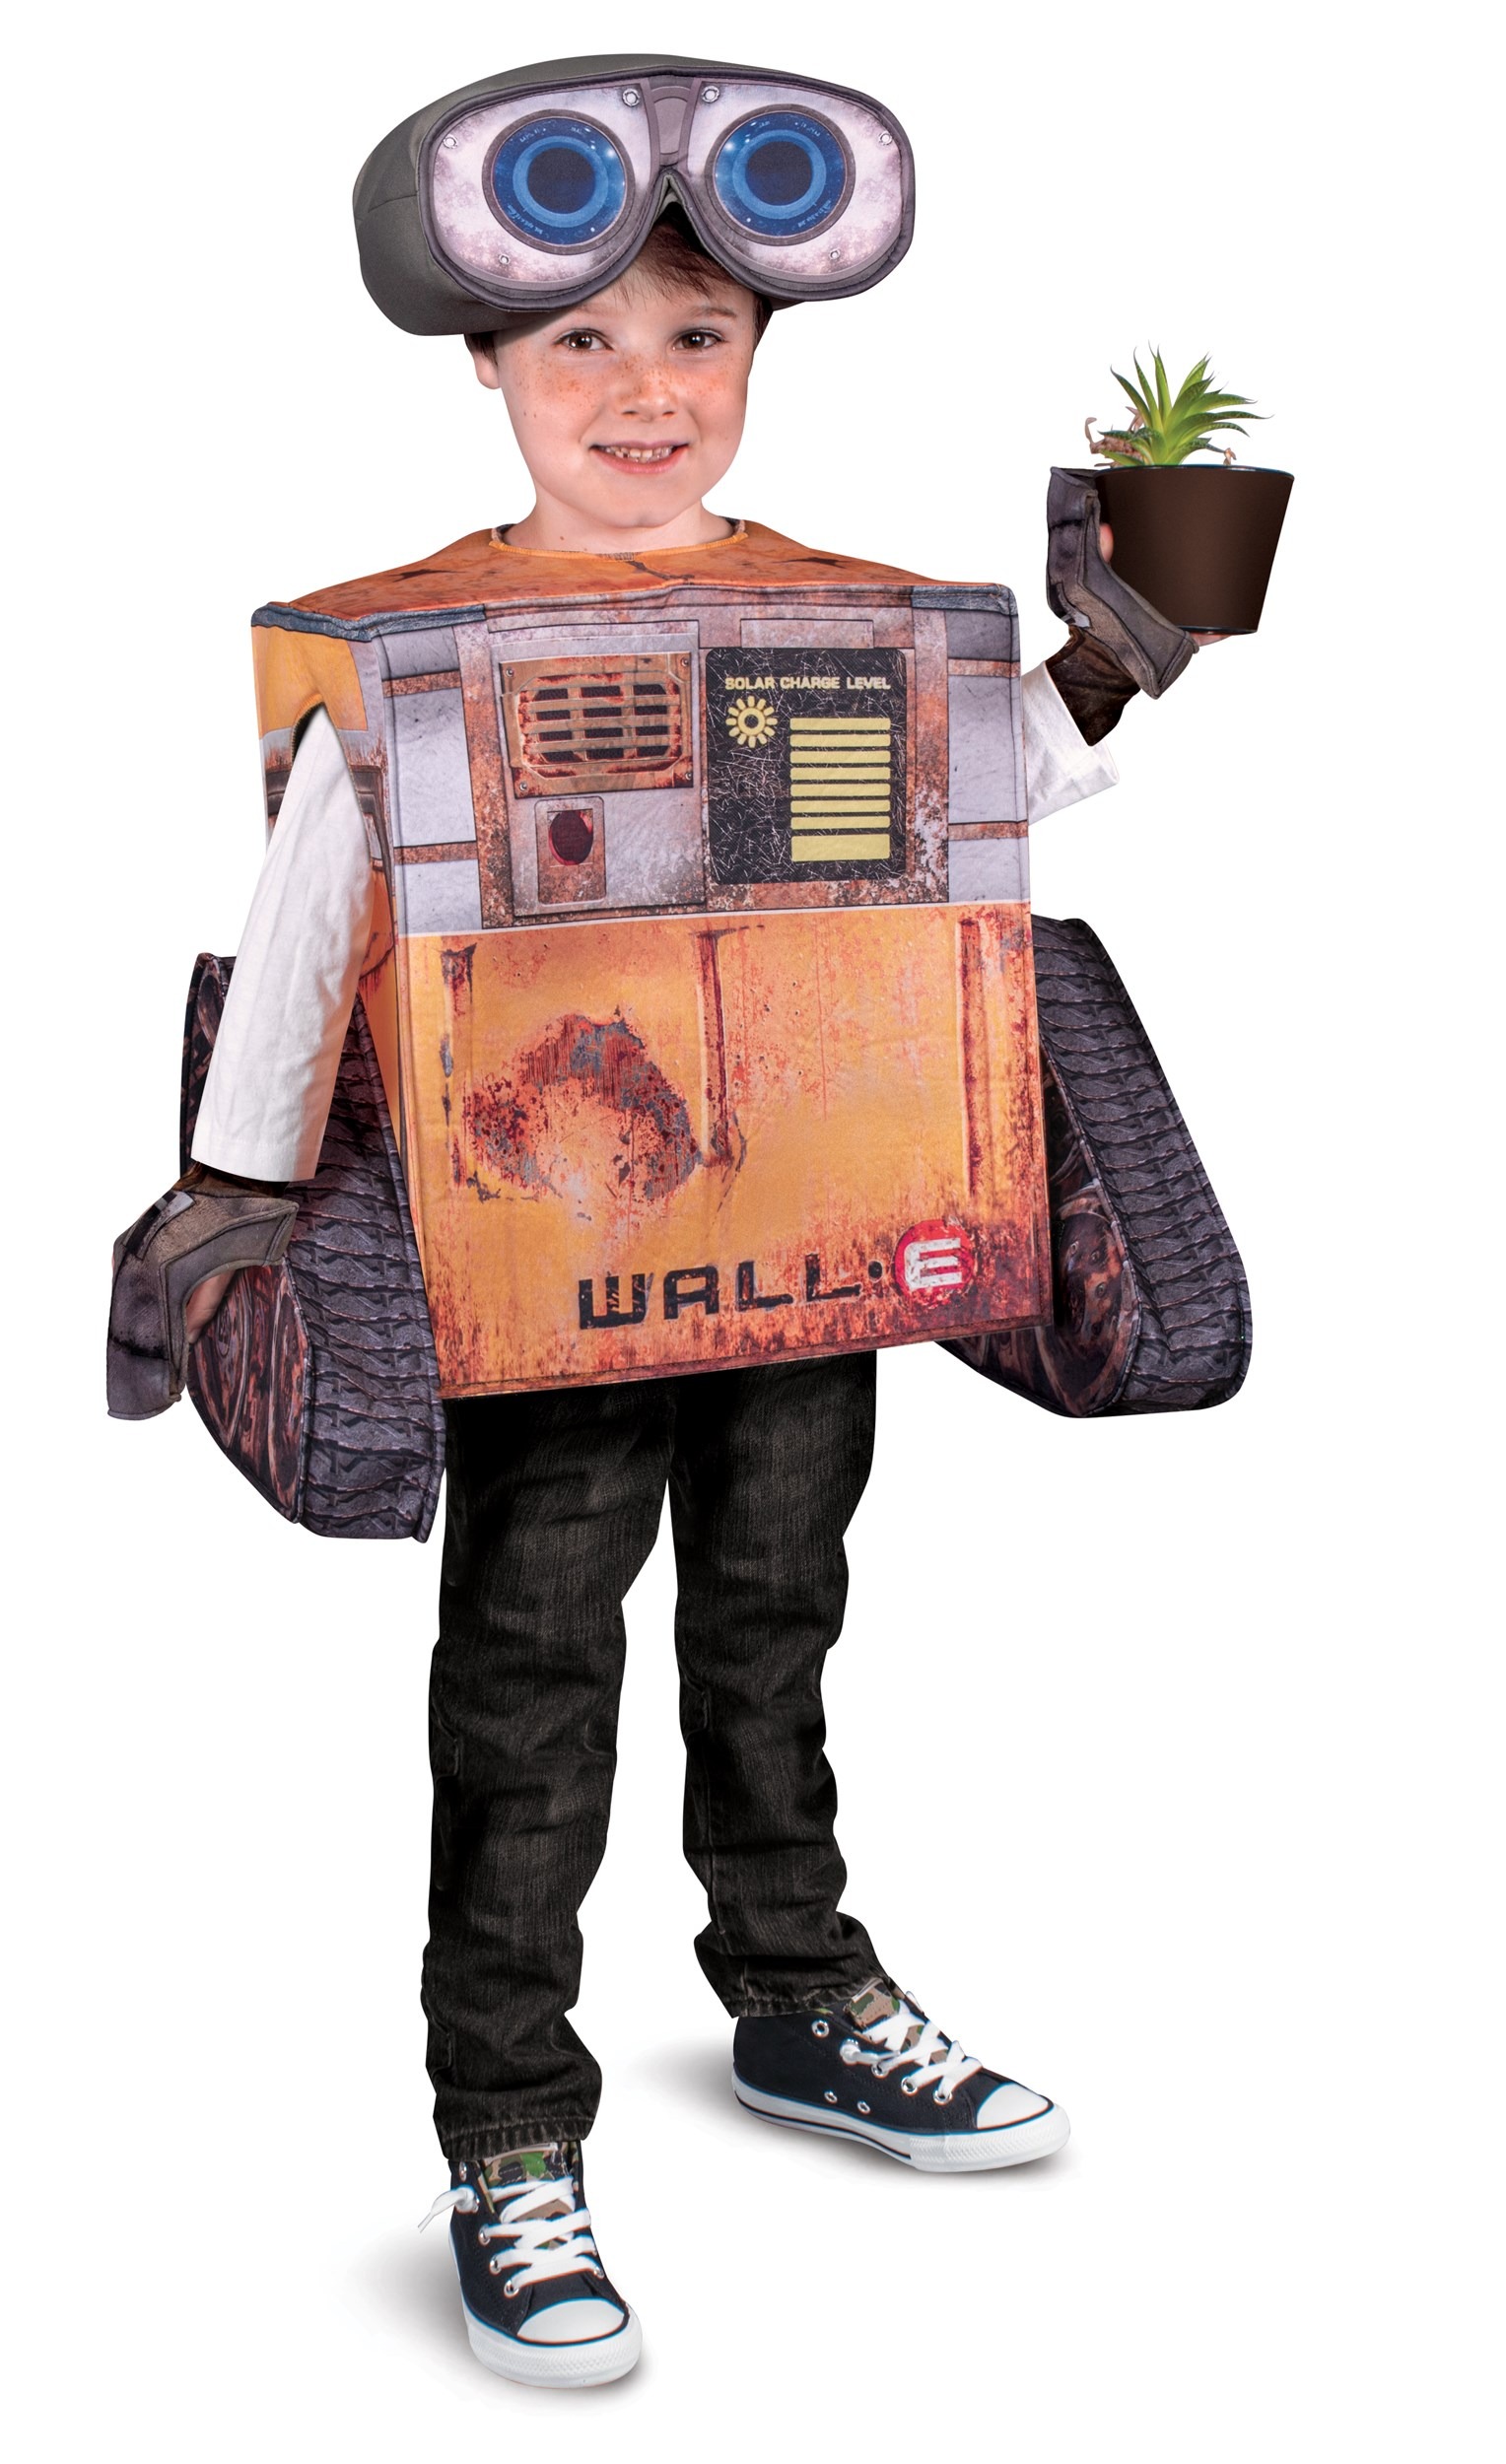 Photos - Fancy Dress Disguise Limited Wall-E Costume for Toddlers Orange/Gray DI108929